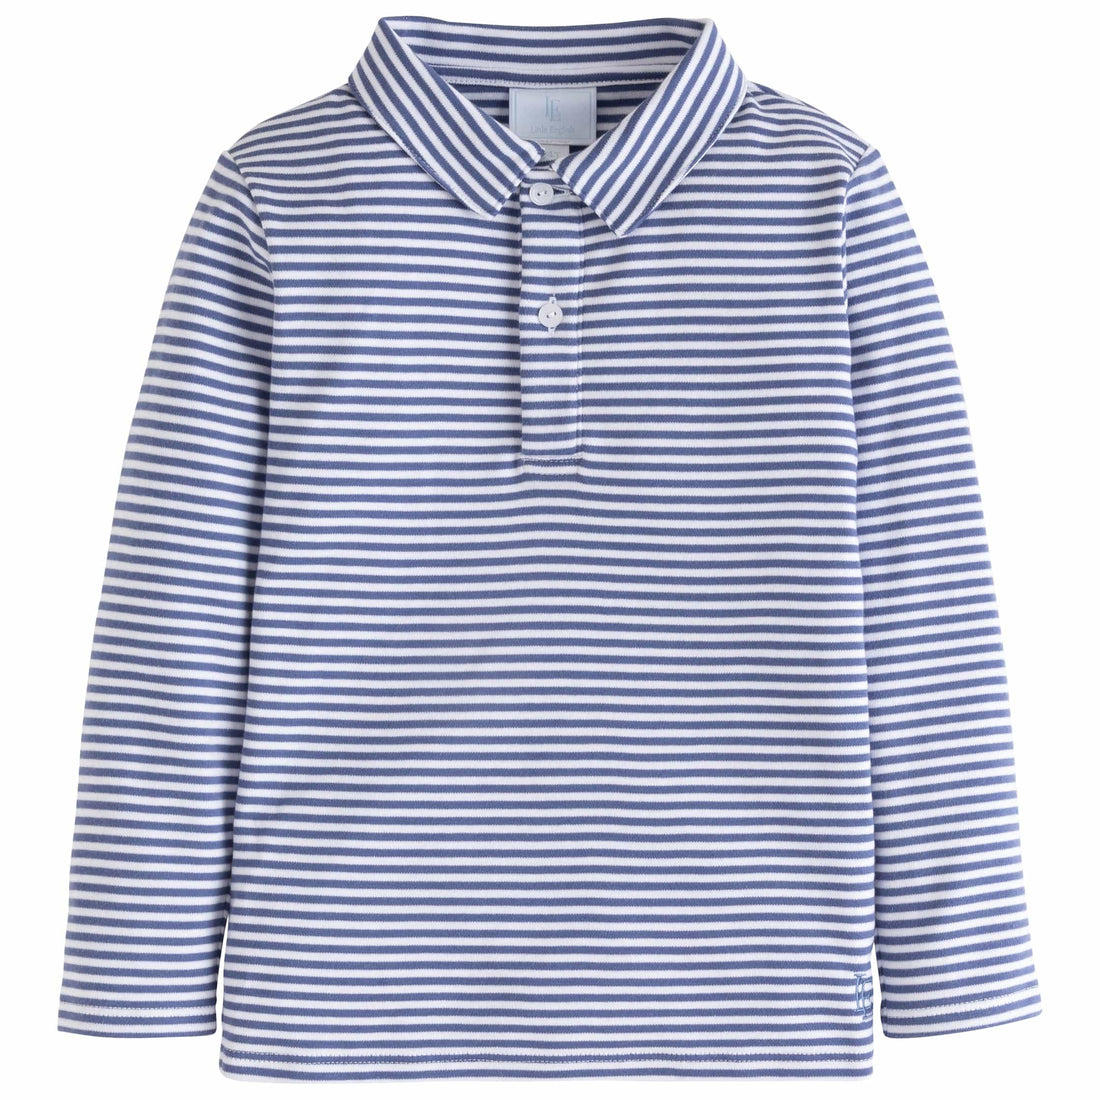 Little English classic childrens clothing toddler boy gray-blue and white striped long sleeve polo